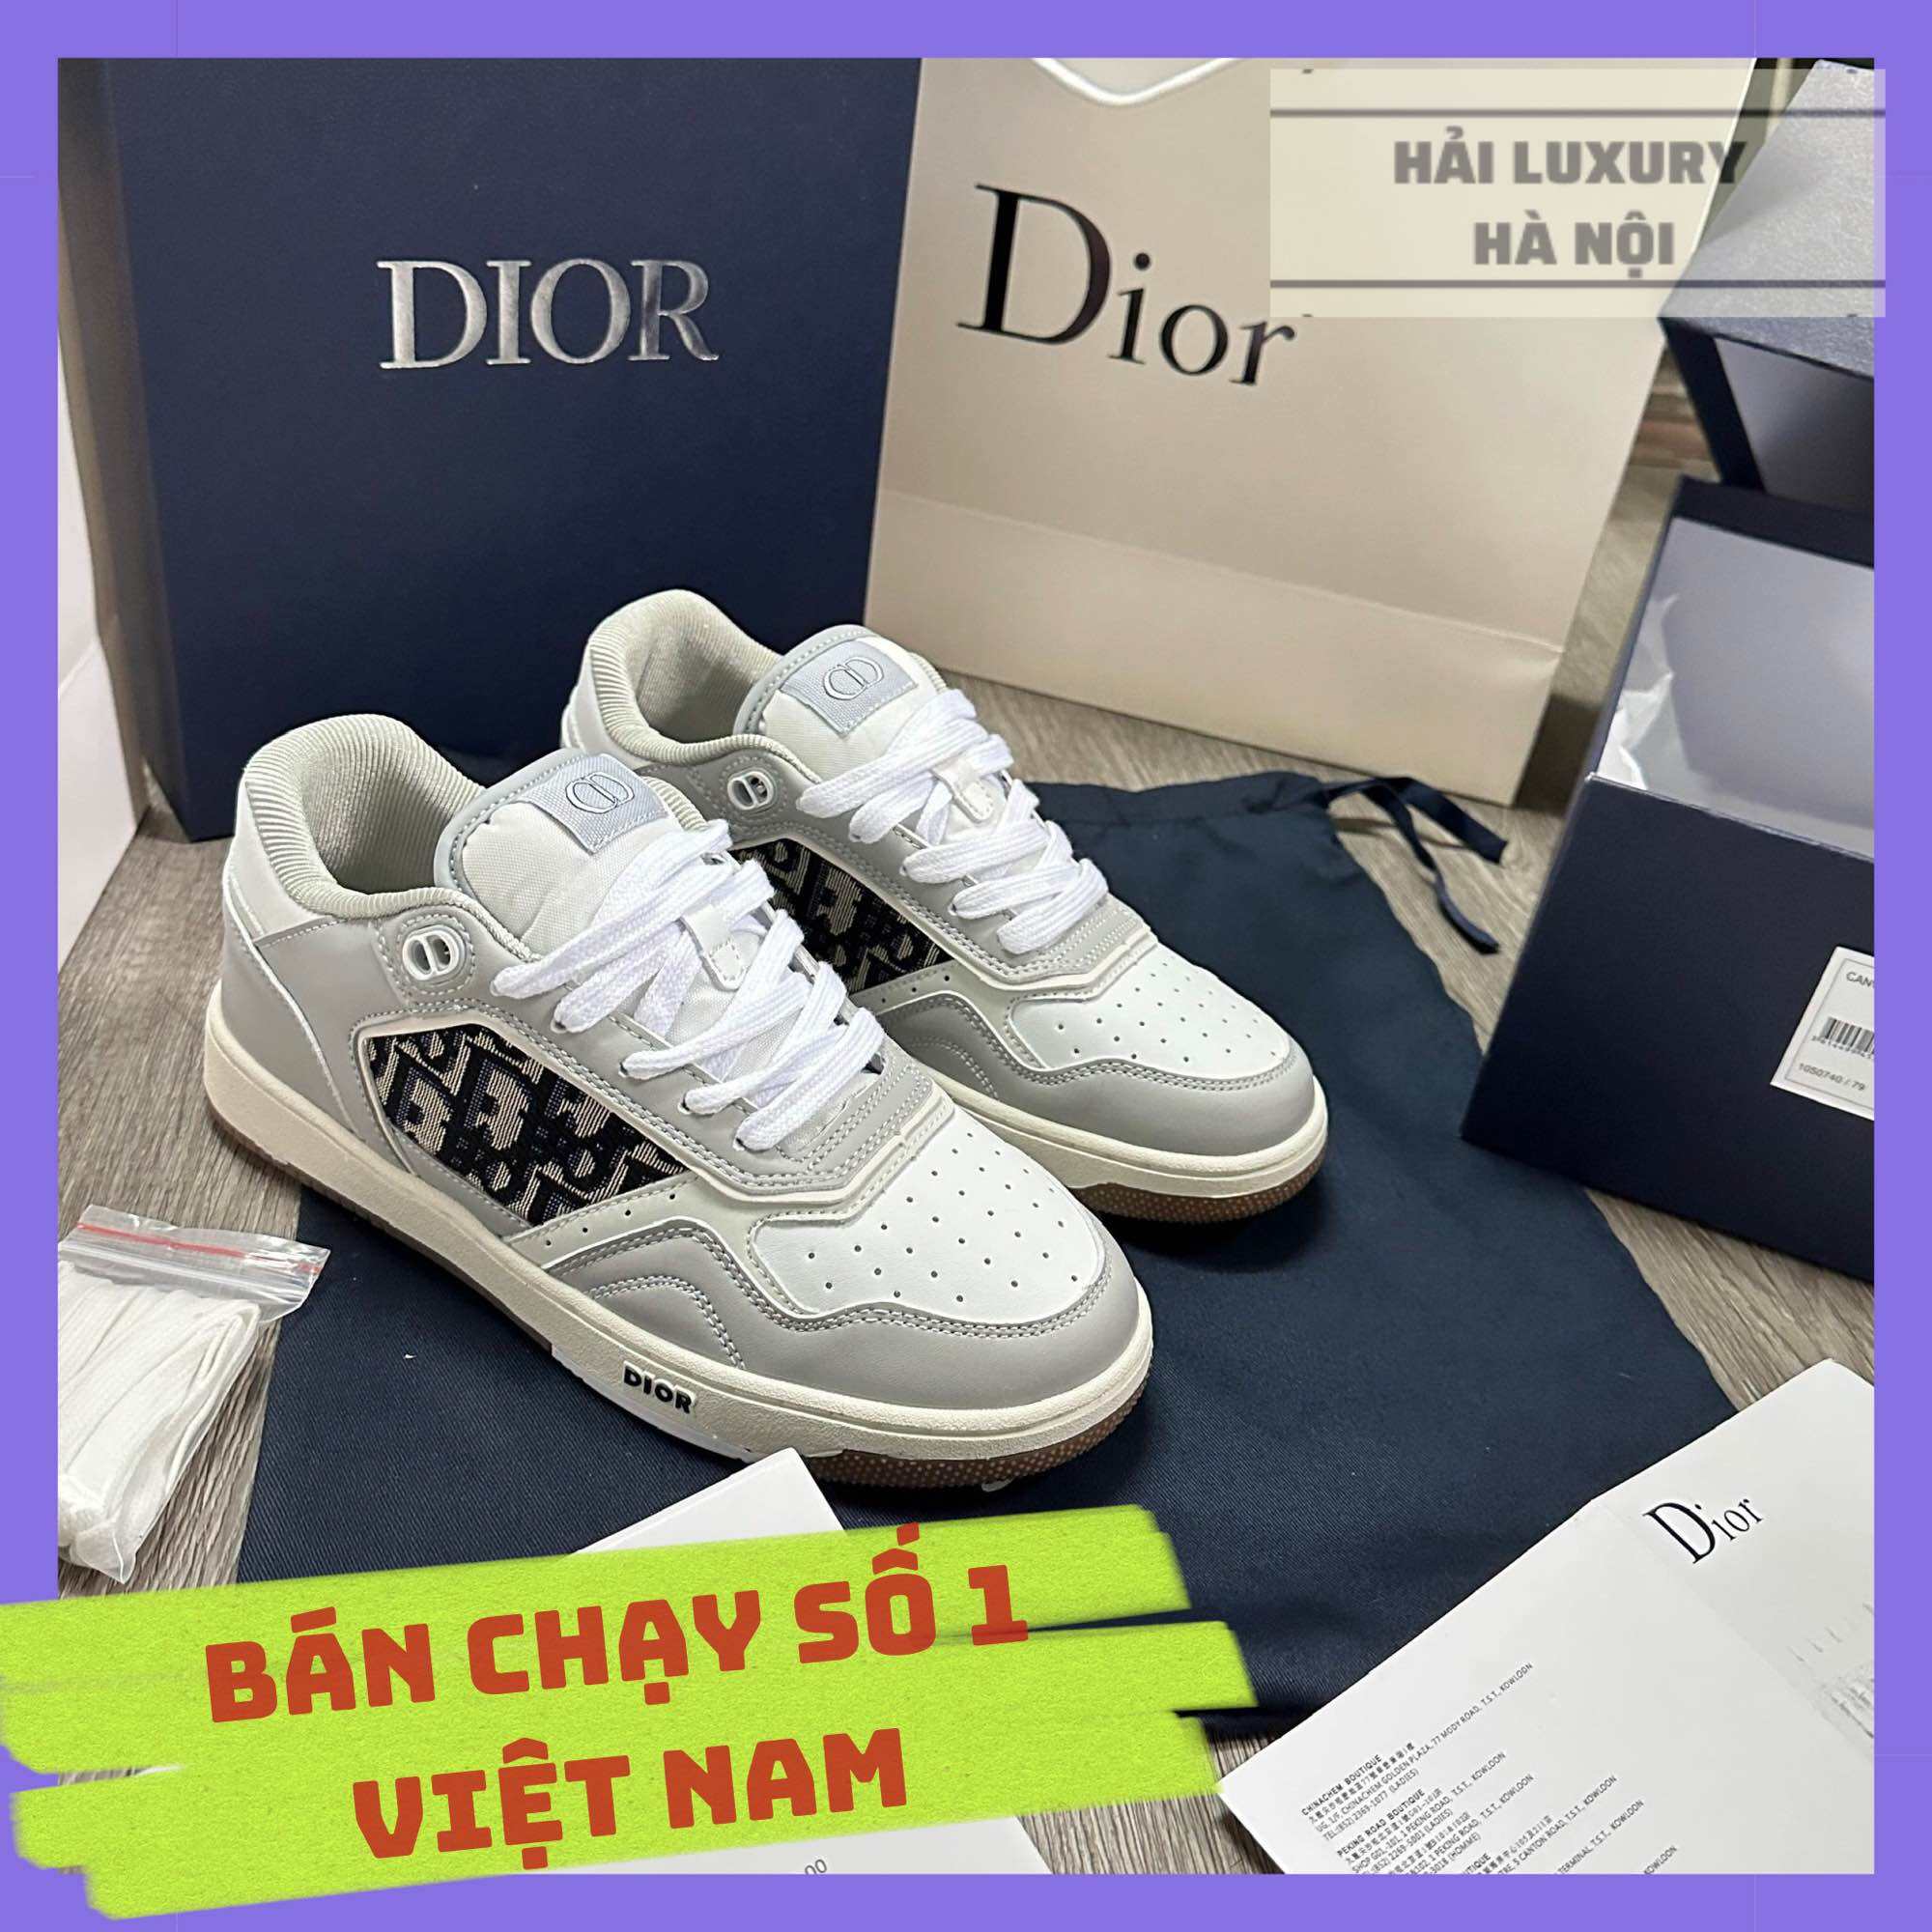 Dior B27 LowTop Sneaker Mens Fashion Footwear Sneakers on Carousell